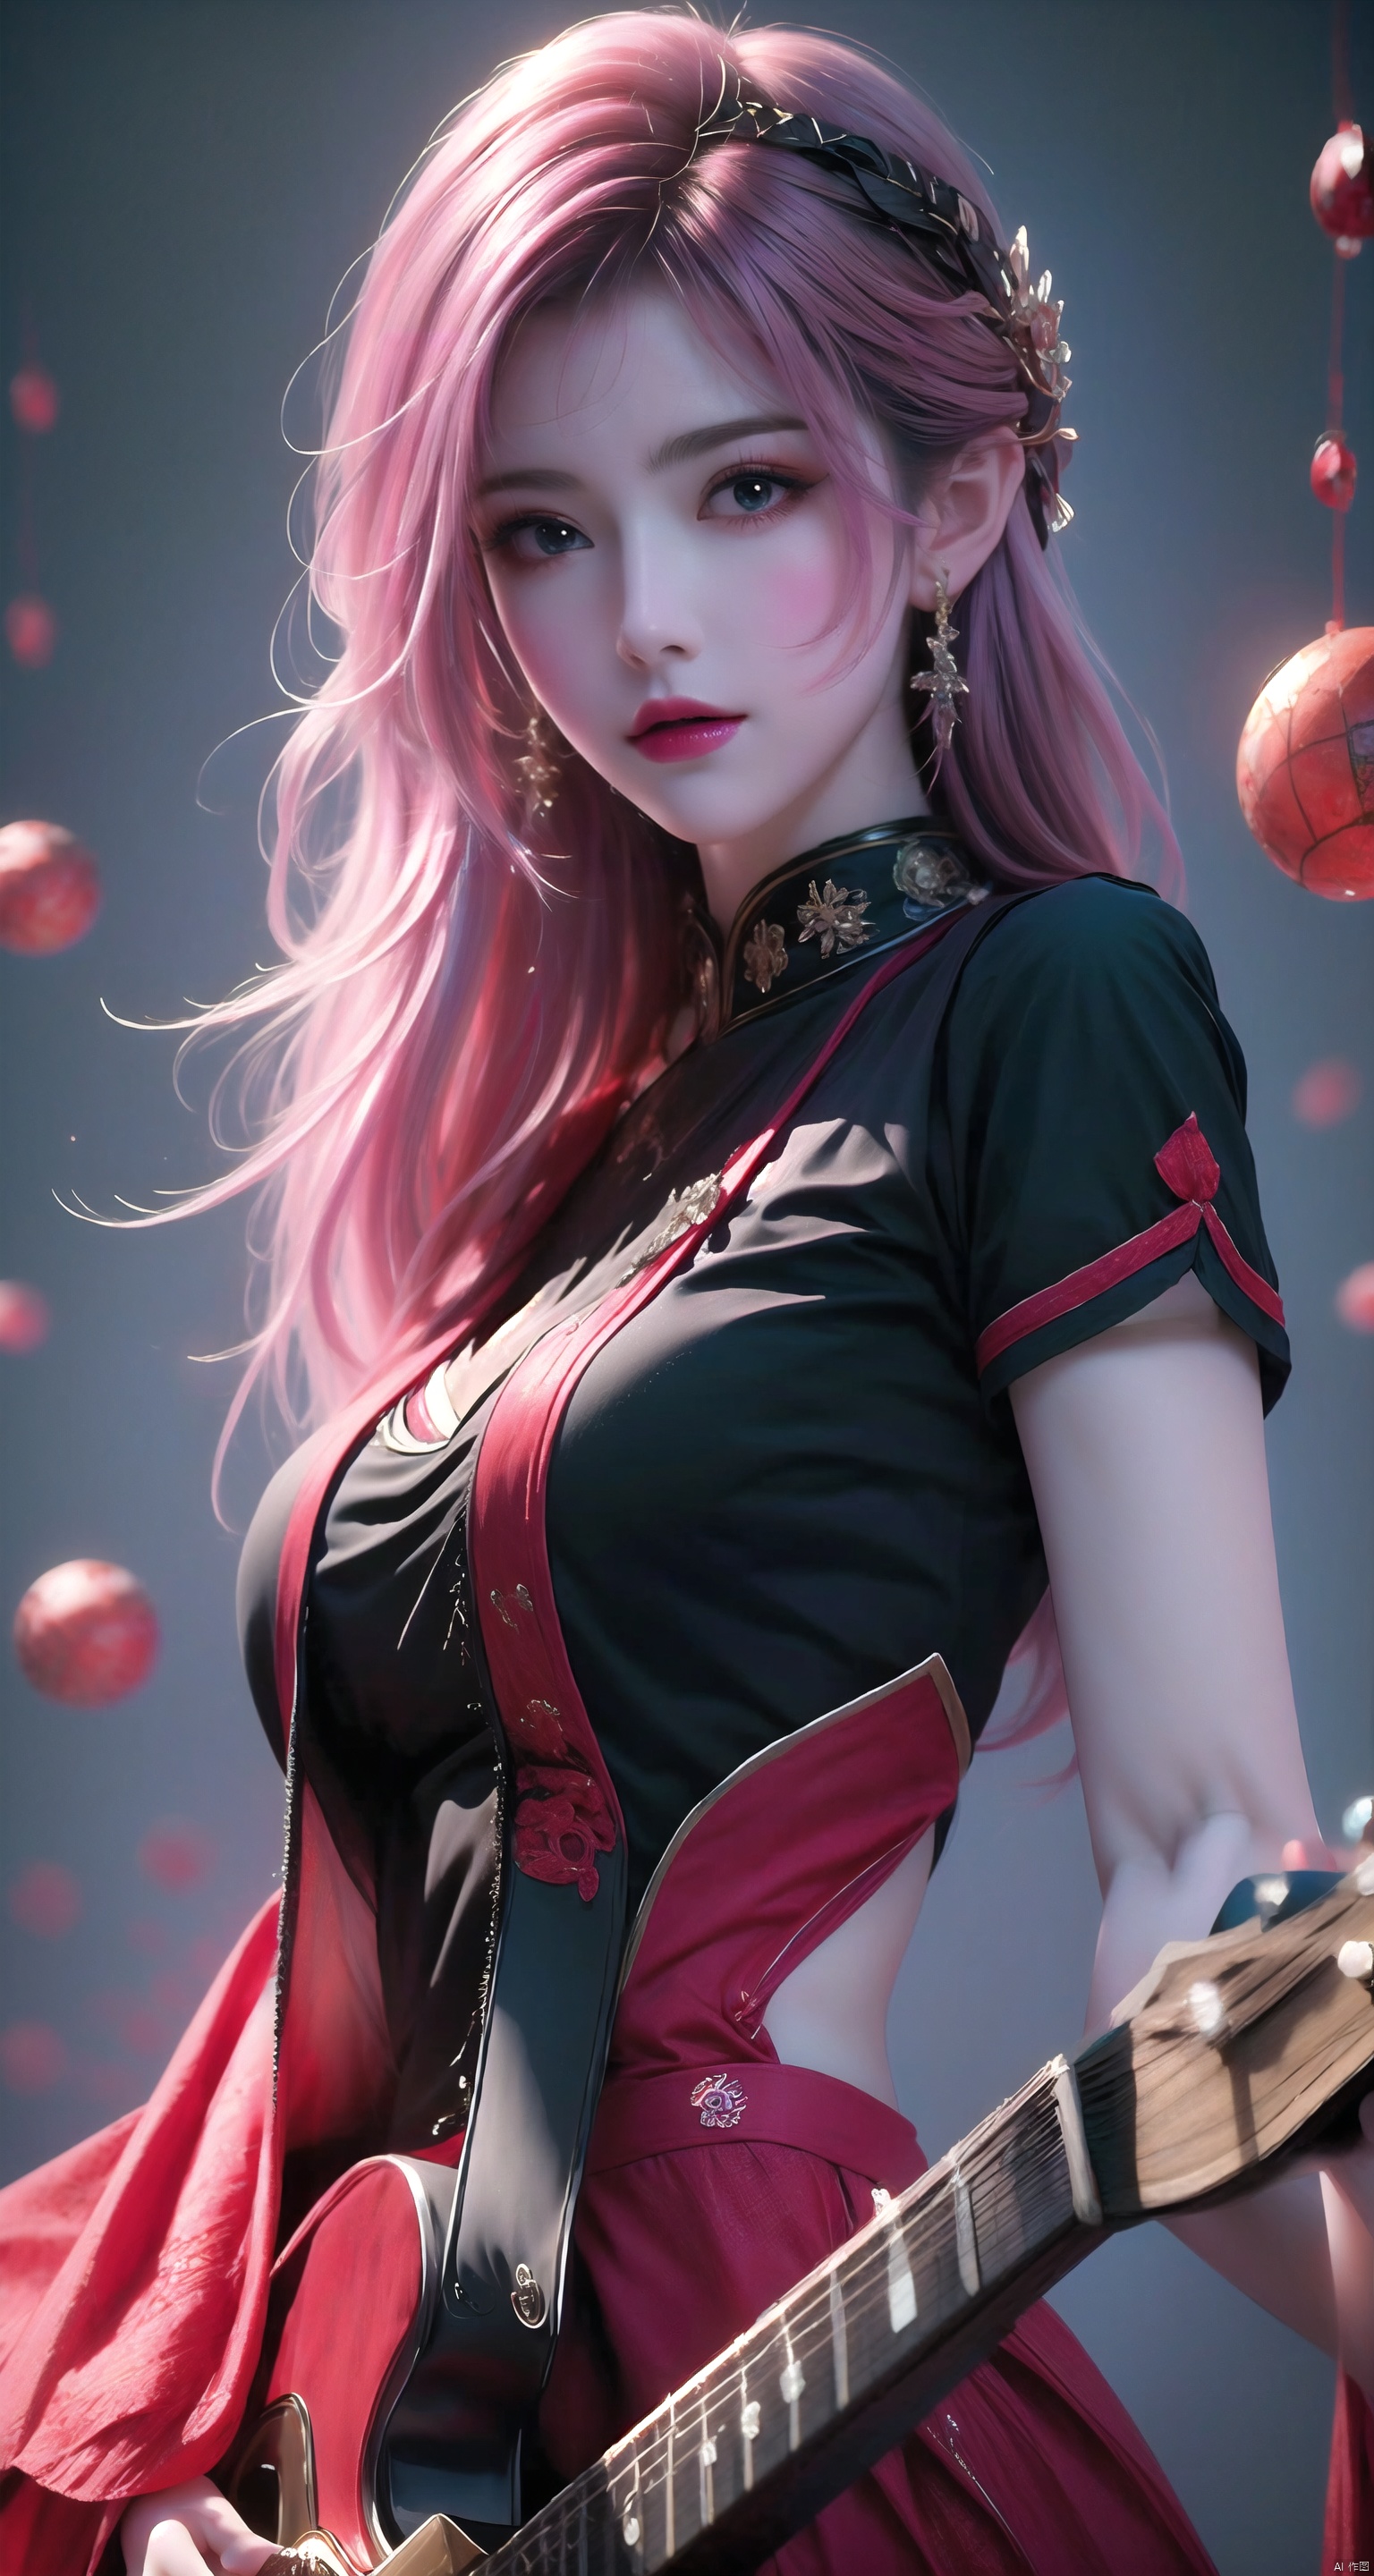  Masterpiece, best quality, 8K, HDR, executive, 1 girl, solo, multi colored hair, pink hair, wearing Memphis style clothing, holding a guitar, standing in front of a brightly colored geometric background. A relaxed and cheerful face, surrounded by colorful balls. High resolution images, popular on ArtStation and CGSociety, are complex, highly detailed, and with clear focus, creating dramatic and realistic painting art by Midtravel and Greg Rutkowski, (big breasta:1.39),

